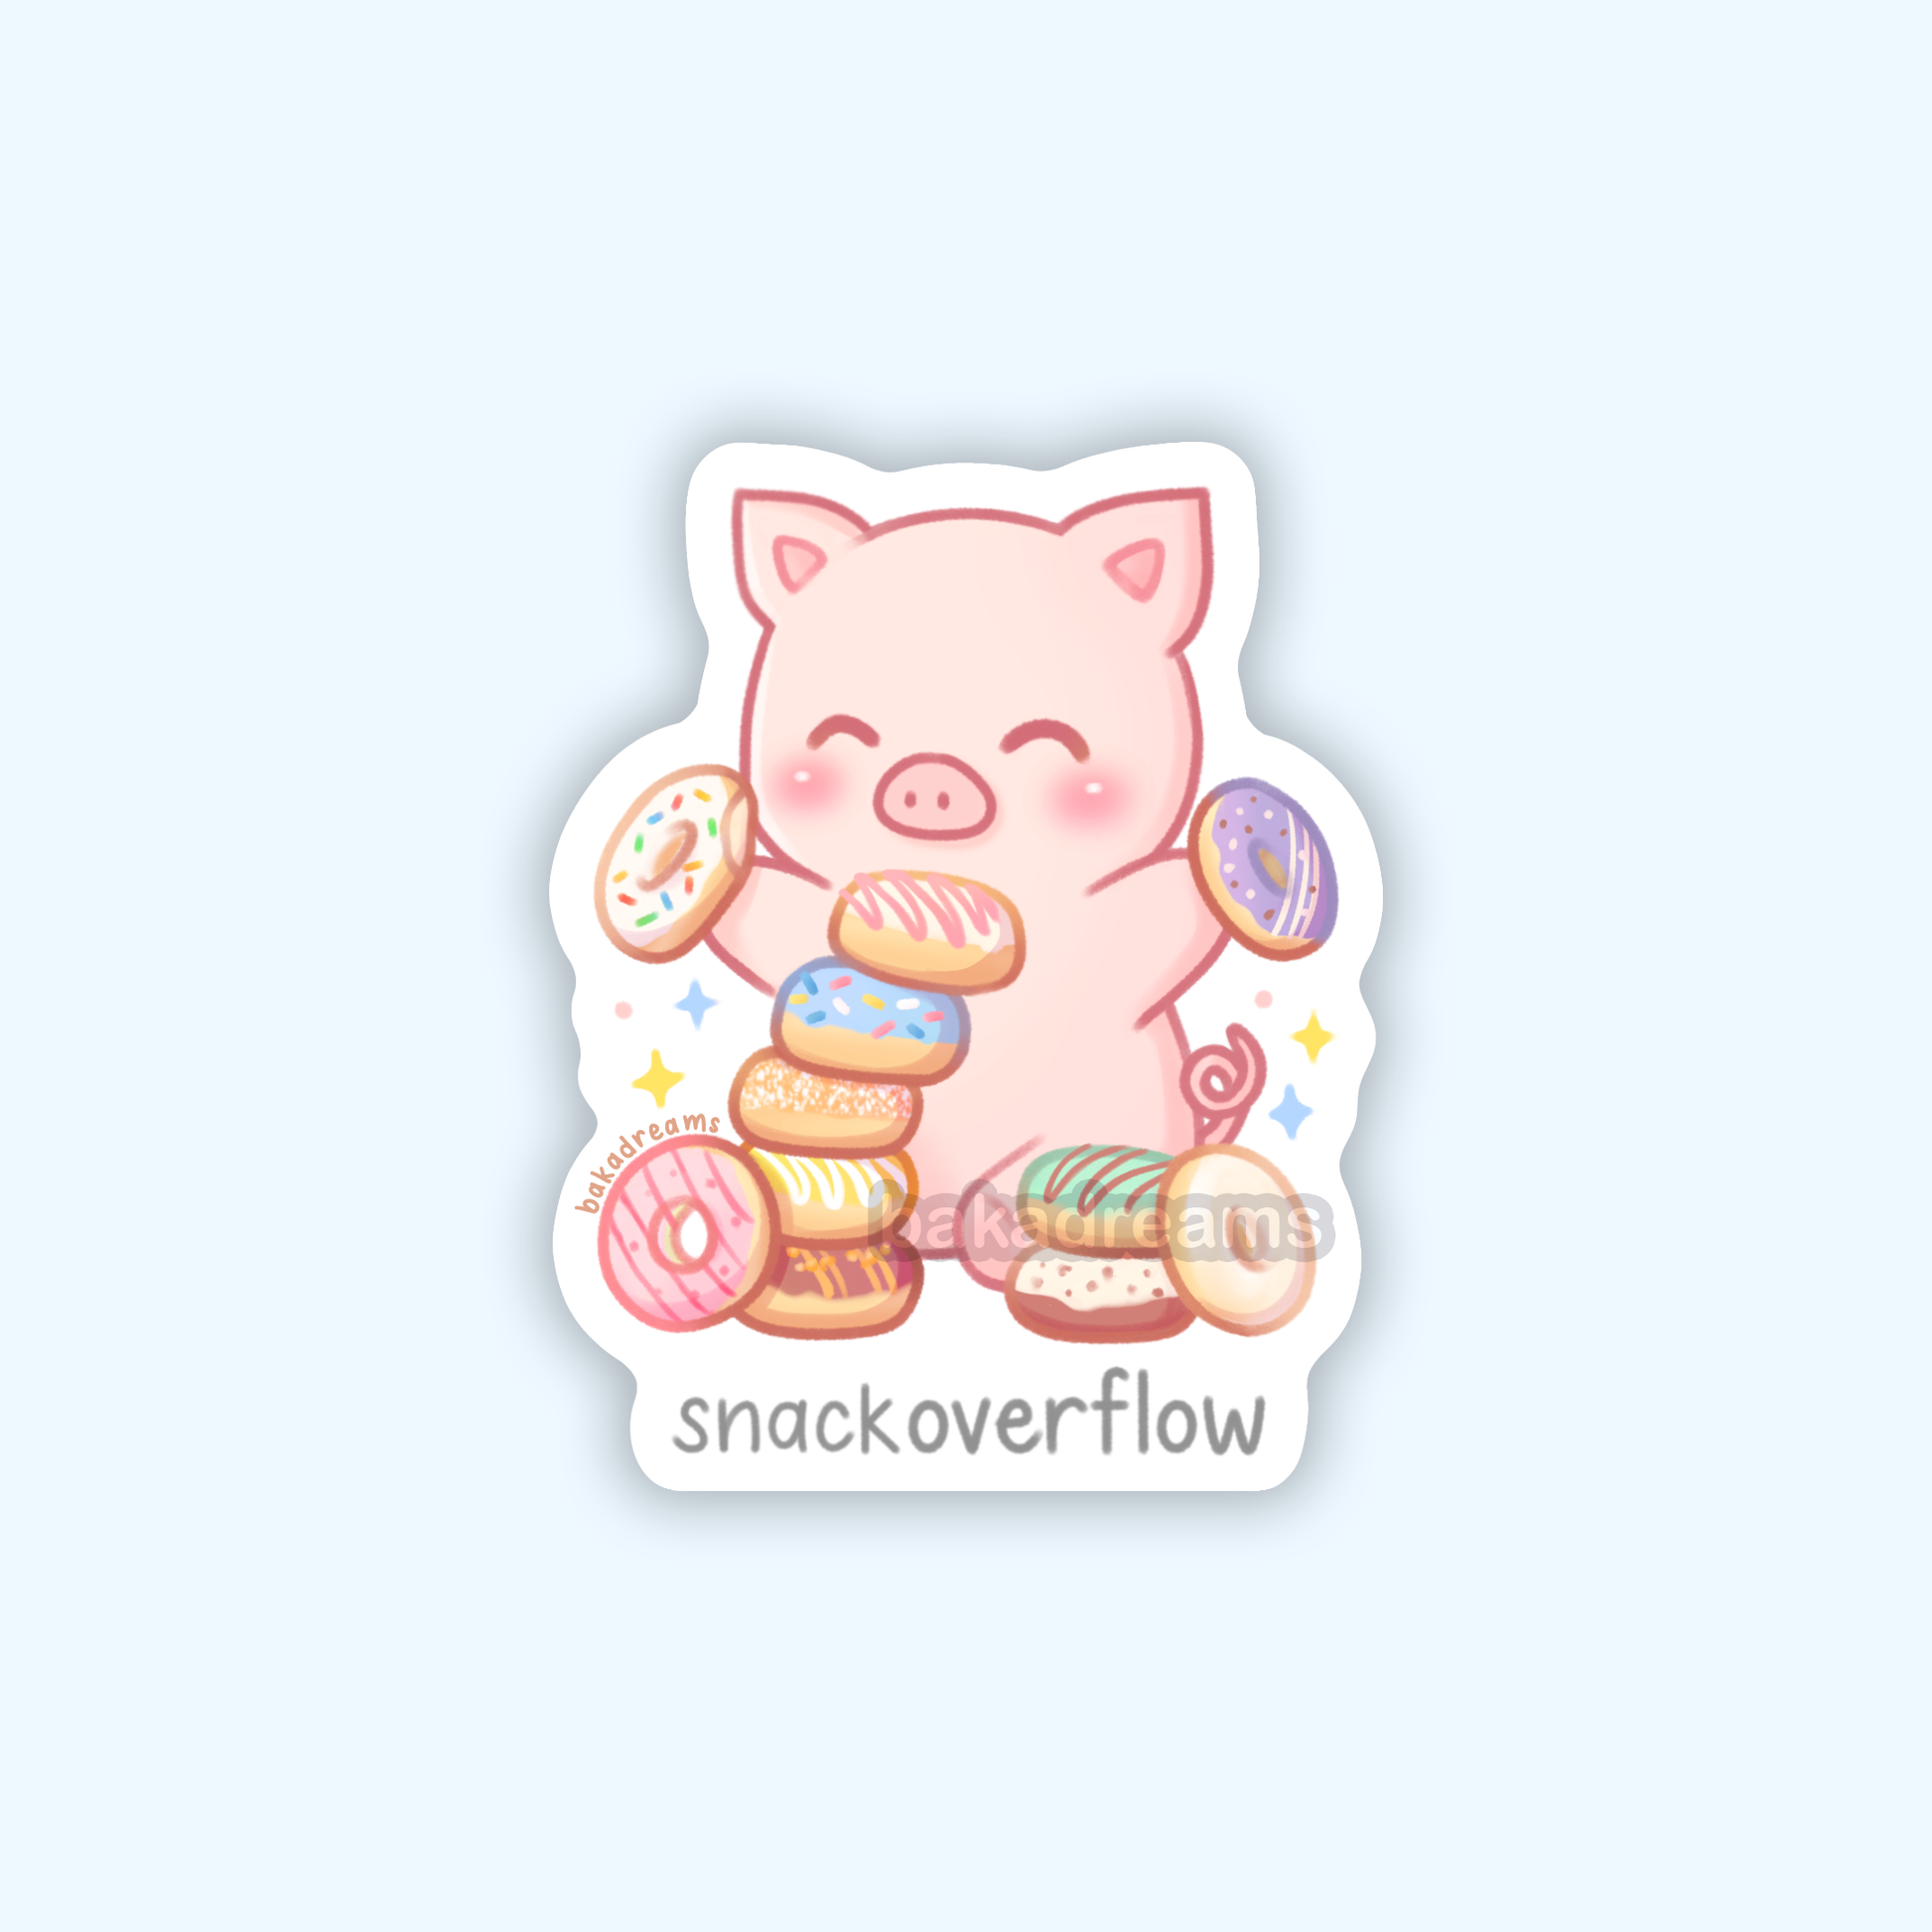 stack overflow parody sticker with text snack overflow, pig with stacks of donuts